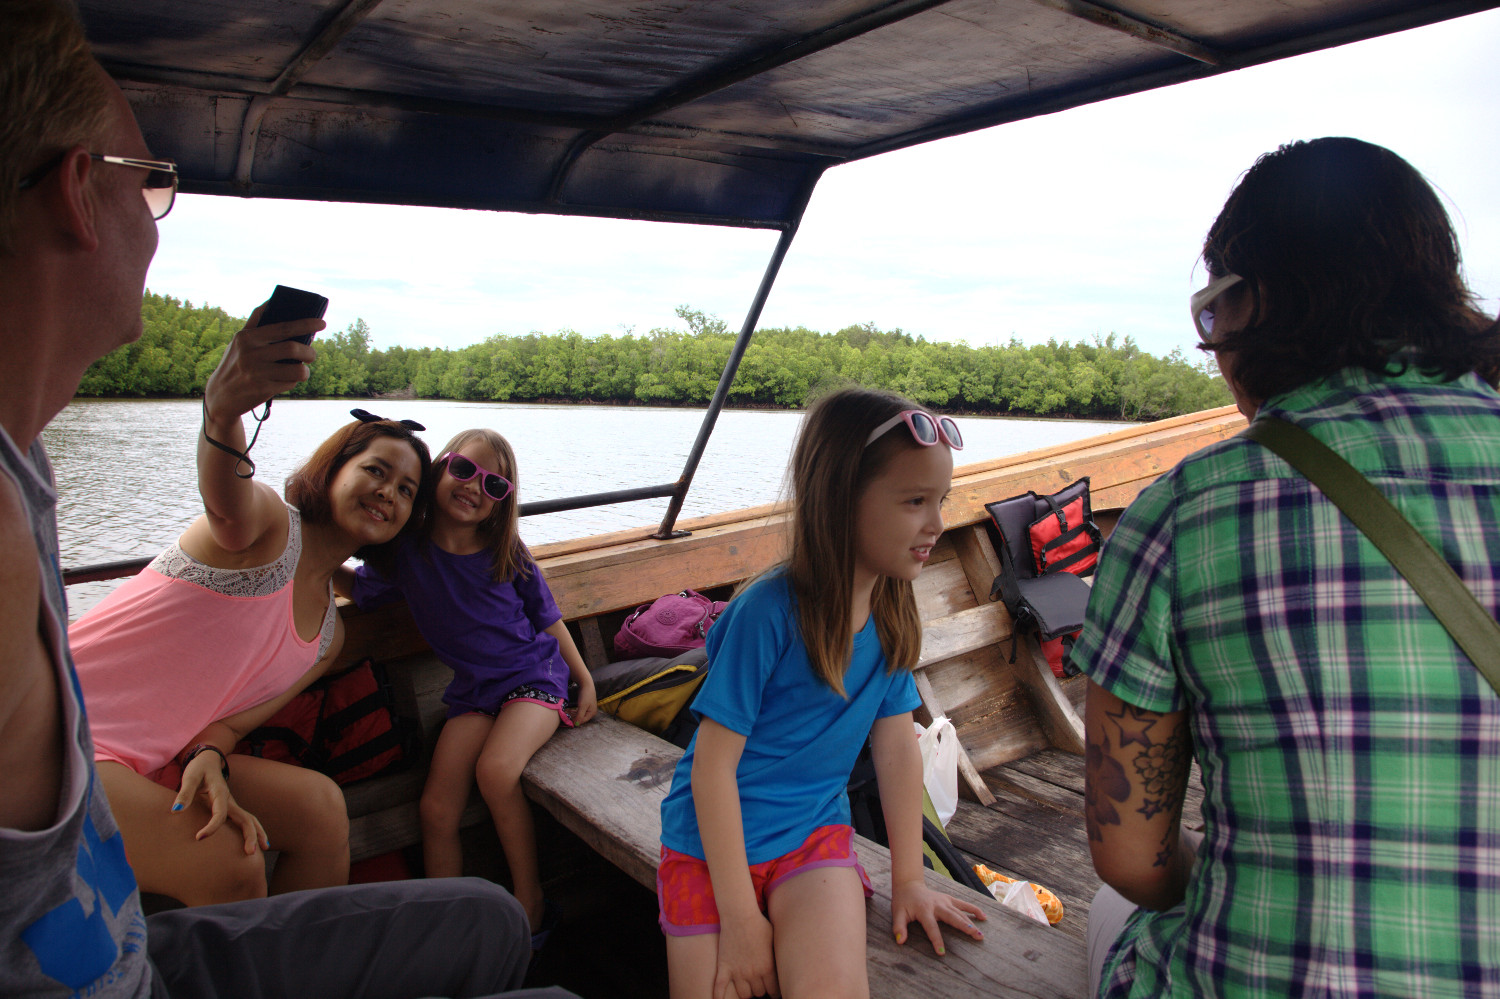 On our way to Koh Muk by longtail boat